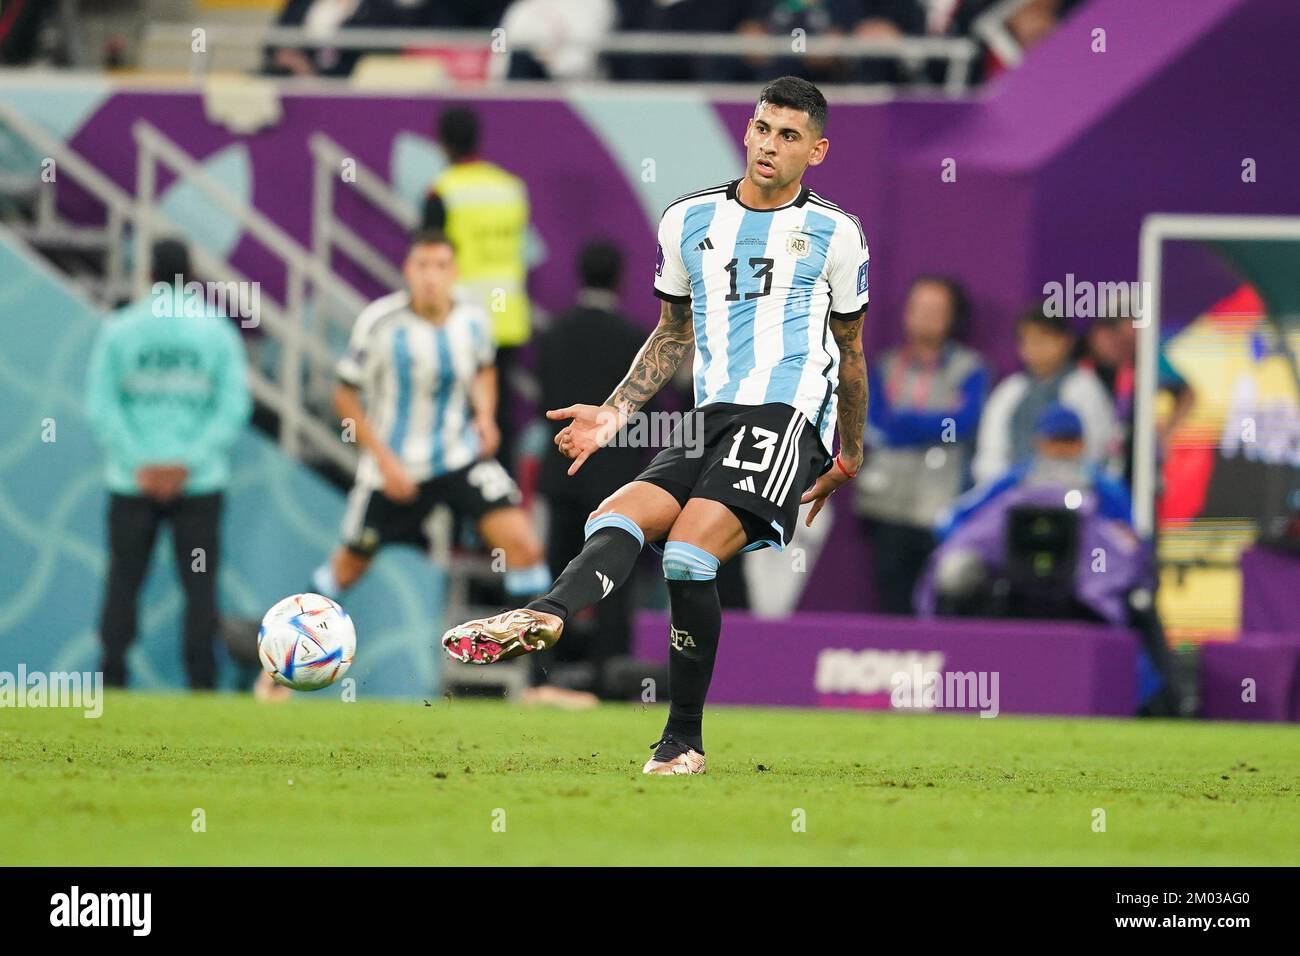 AL RAYYAN, QATAR - DECEMBER 3: Player of Argentina Cristian Romero during the FIFA World Cup Qatar 2022 Round of 16 match between Argentina and Australia at Ahmad bin Ali Stadium on December 3, 2022 in Al Rayyan, Qatar. (Photo by Florencia Tan Jun/PxImages) Credit: Px Images/Alamy Live News Stock Photo